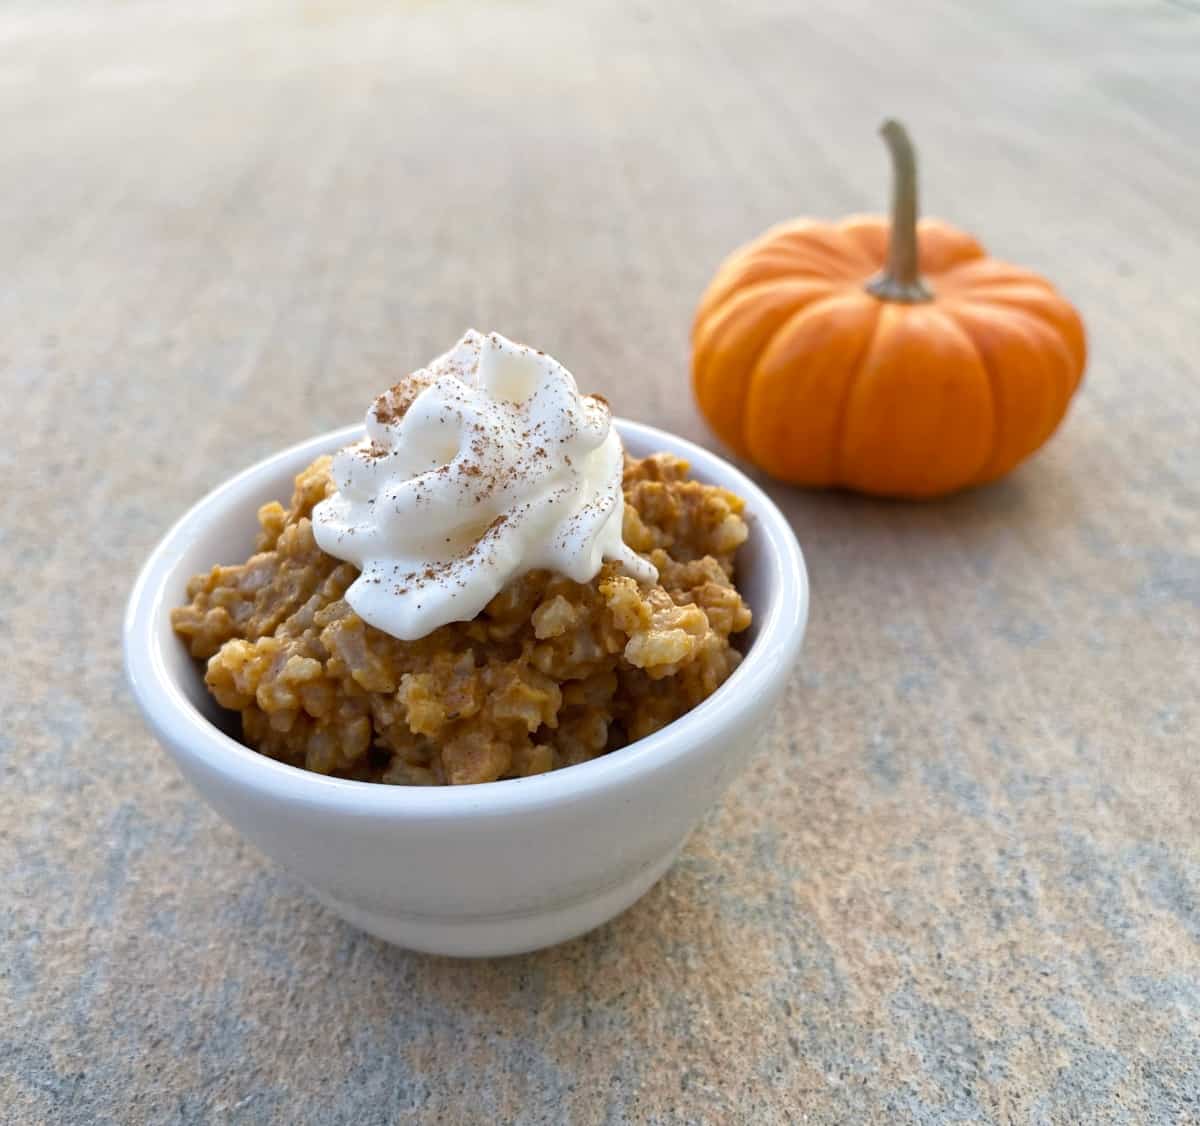 Pumpkin rice pudding in small white bowl garnished with whipped topping and sprinkle of cinnamon with small orange pumpkin in background.